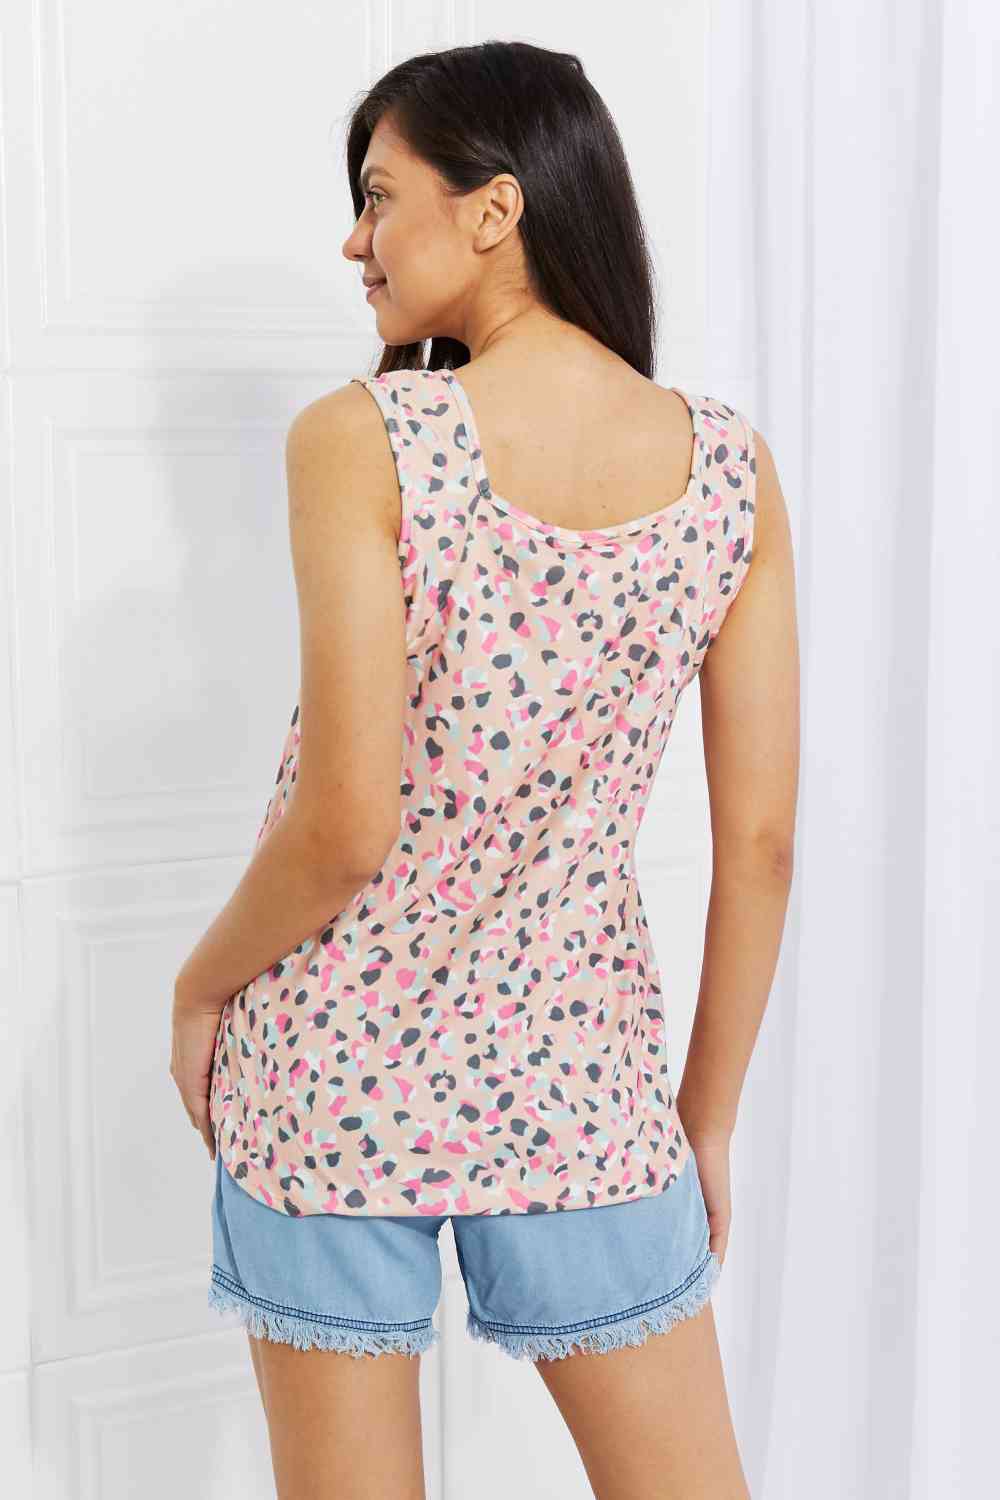 Full Size Printed Sleeveless Top - Women’s Clothing & Accessories - Shirts & Tops - 11 - 2024